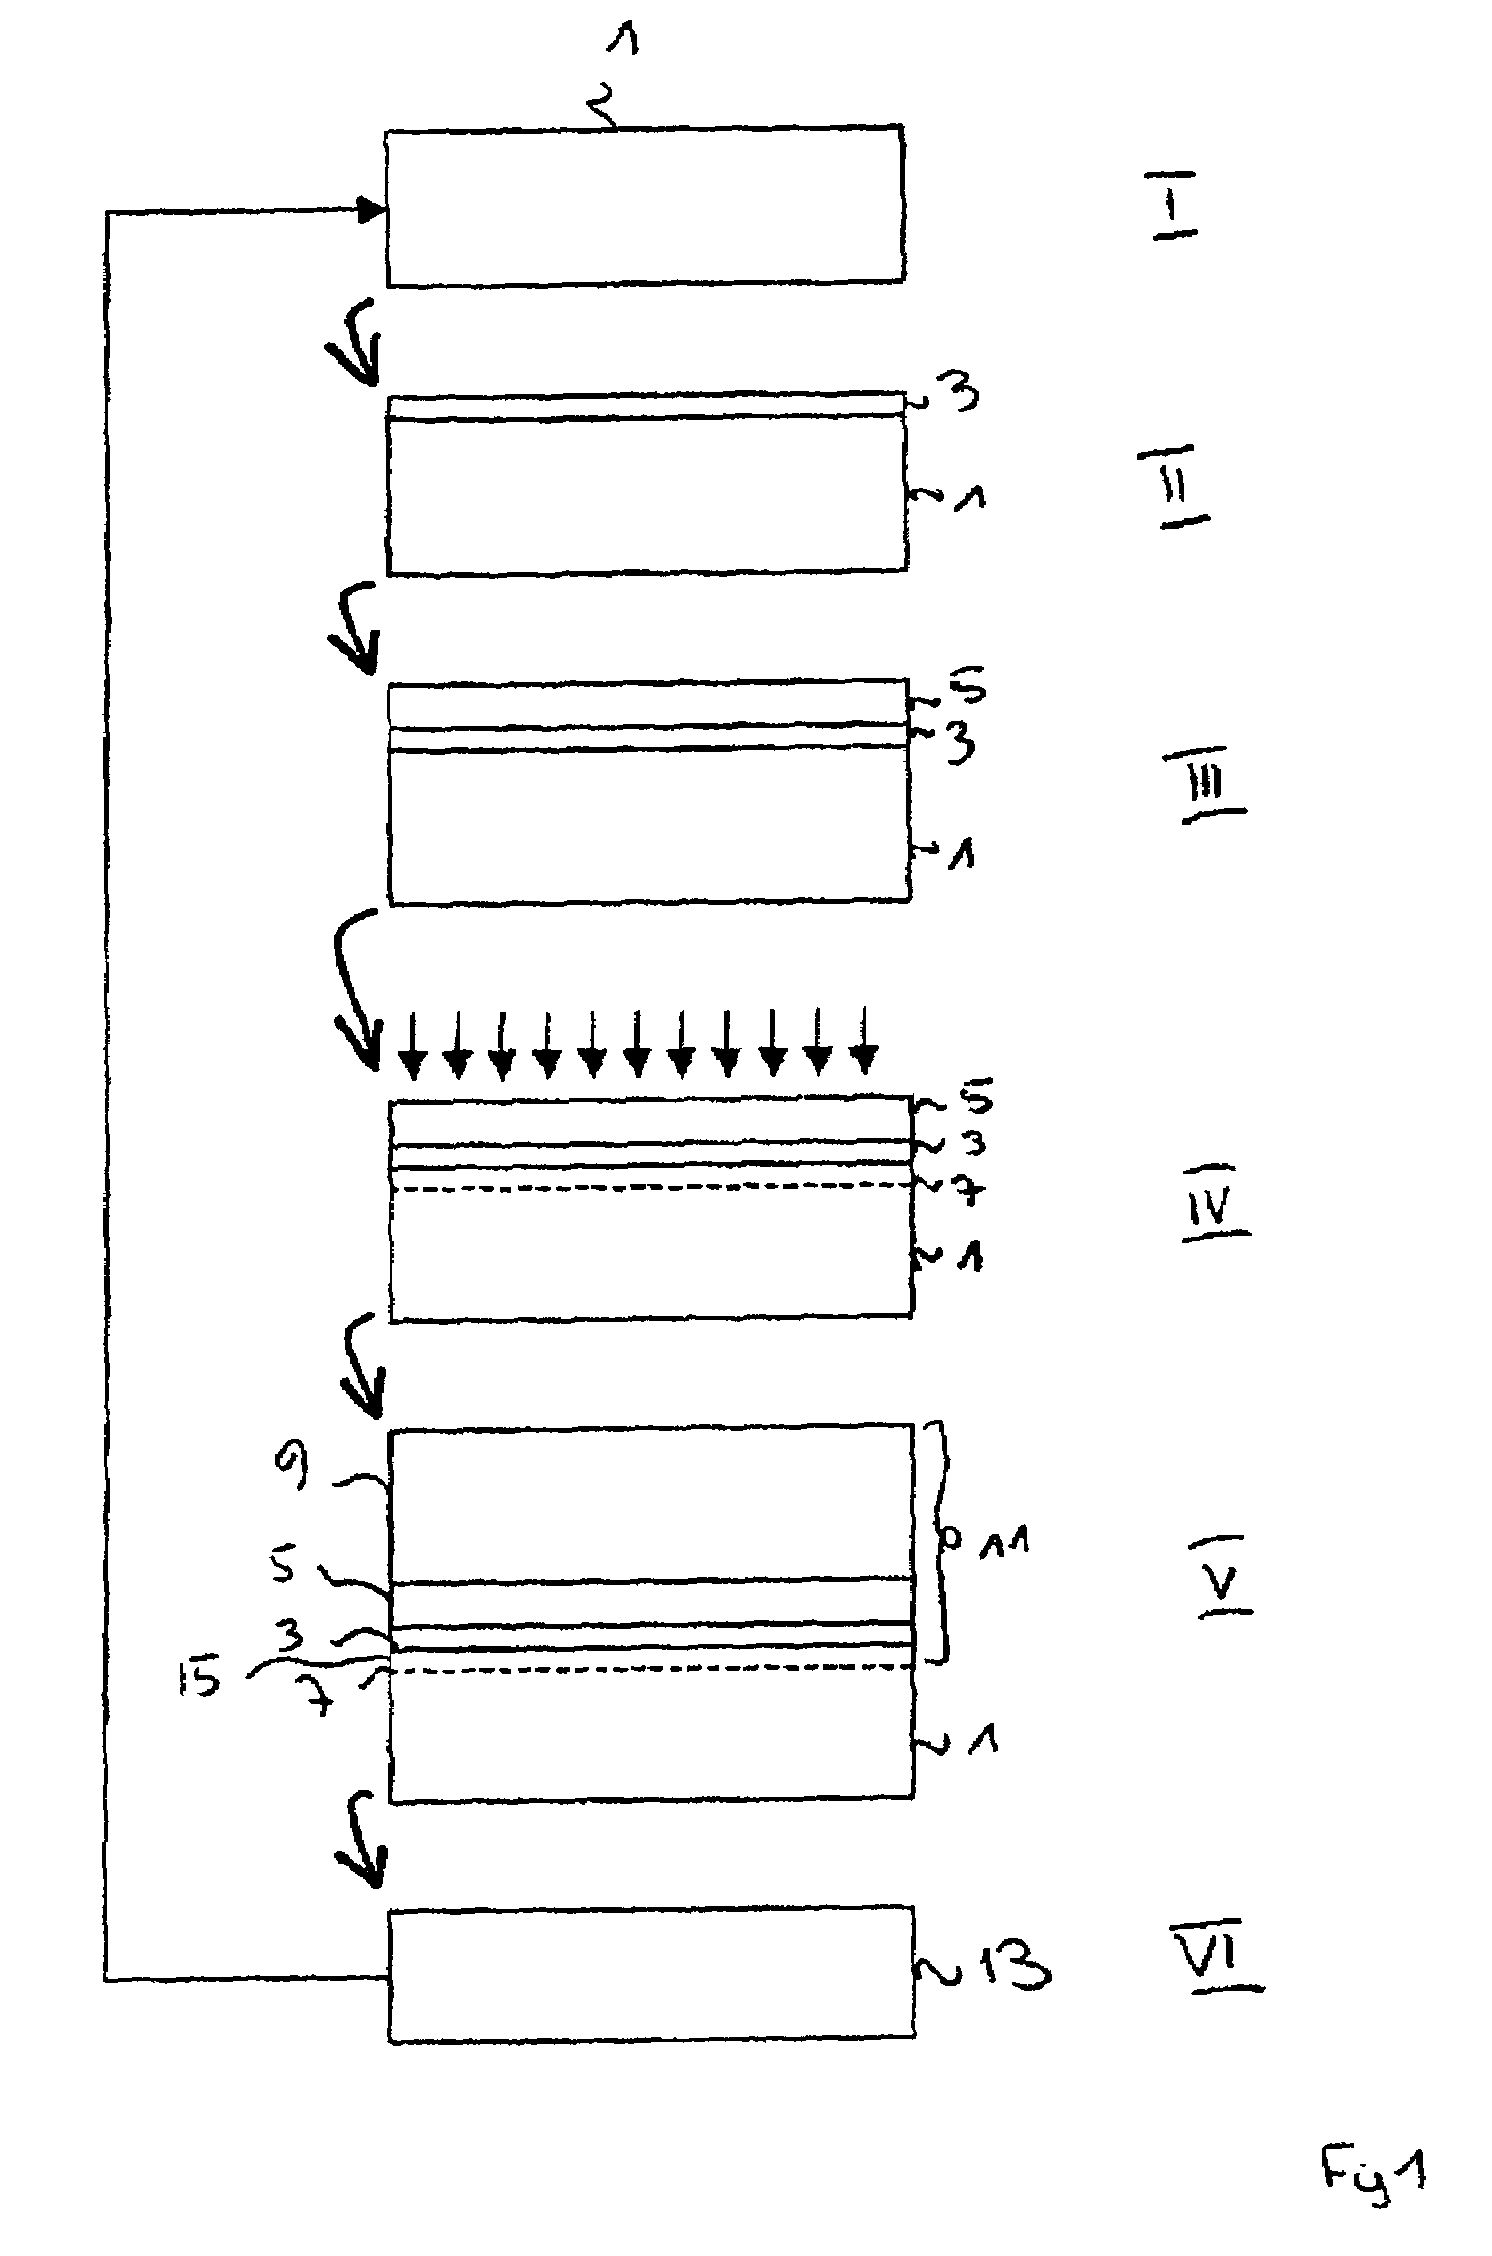 Methods for manufacturing compound-material wafers and for recycling used donor substrates